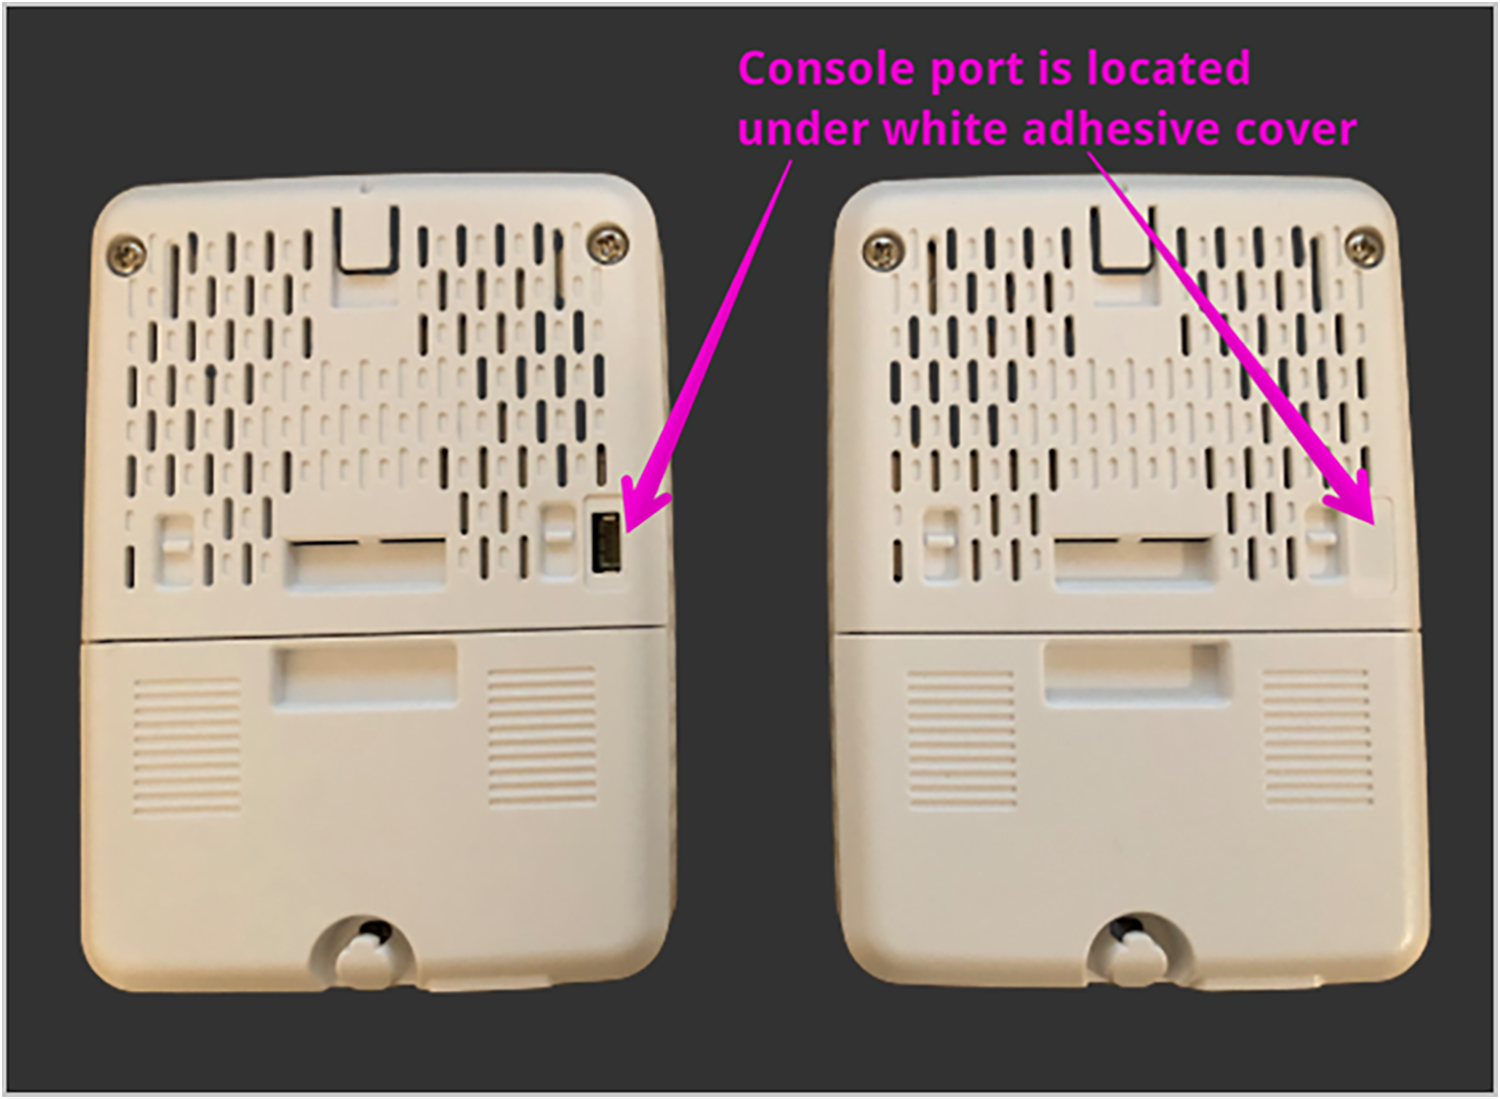 Location of console port in back of sensor